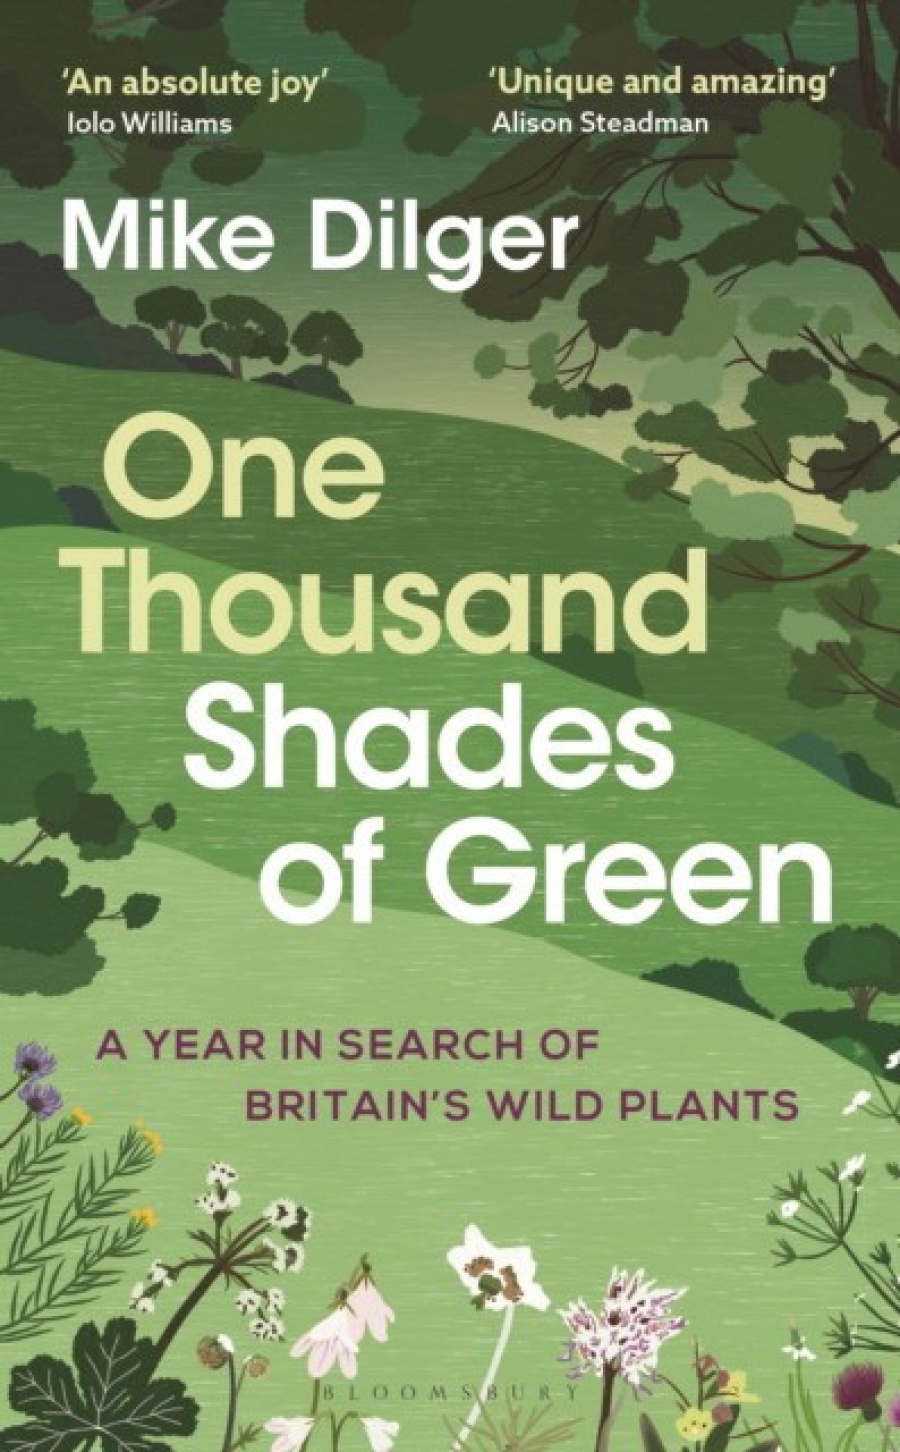 Mike, Dilger One thousand shades of green 